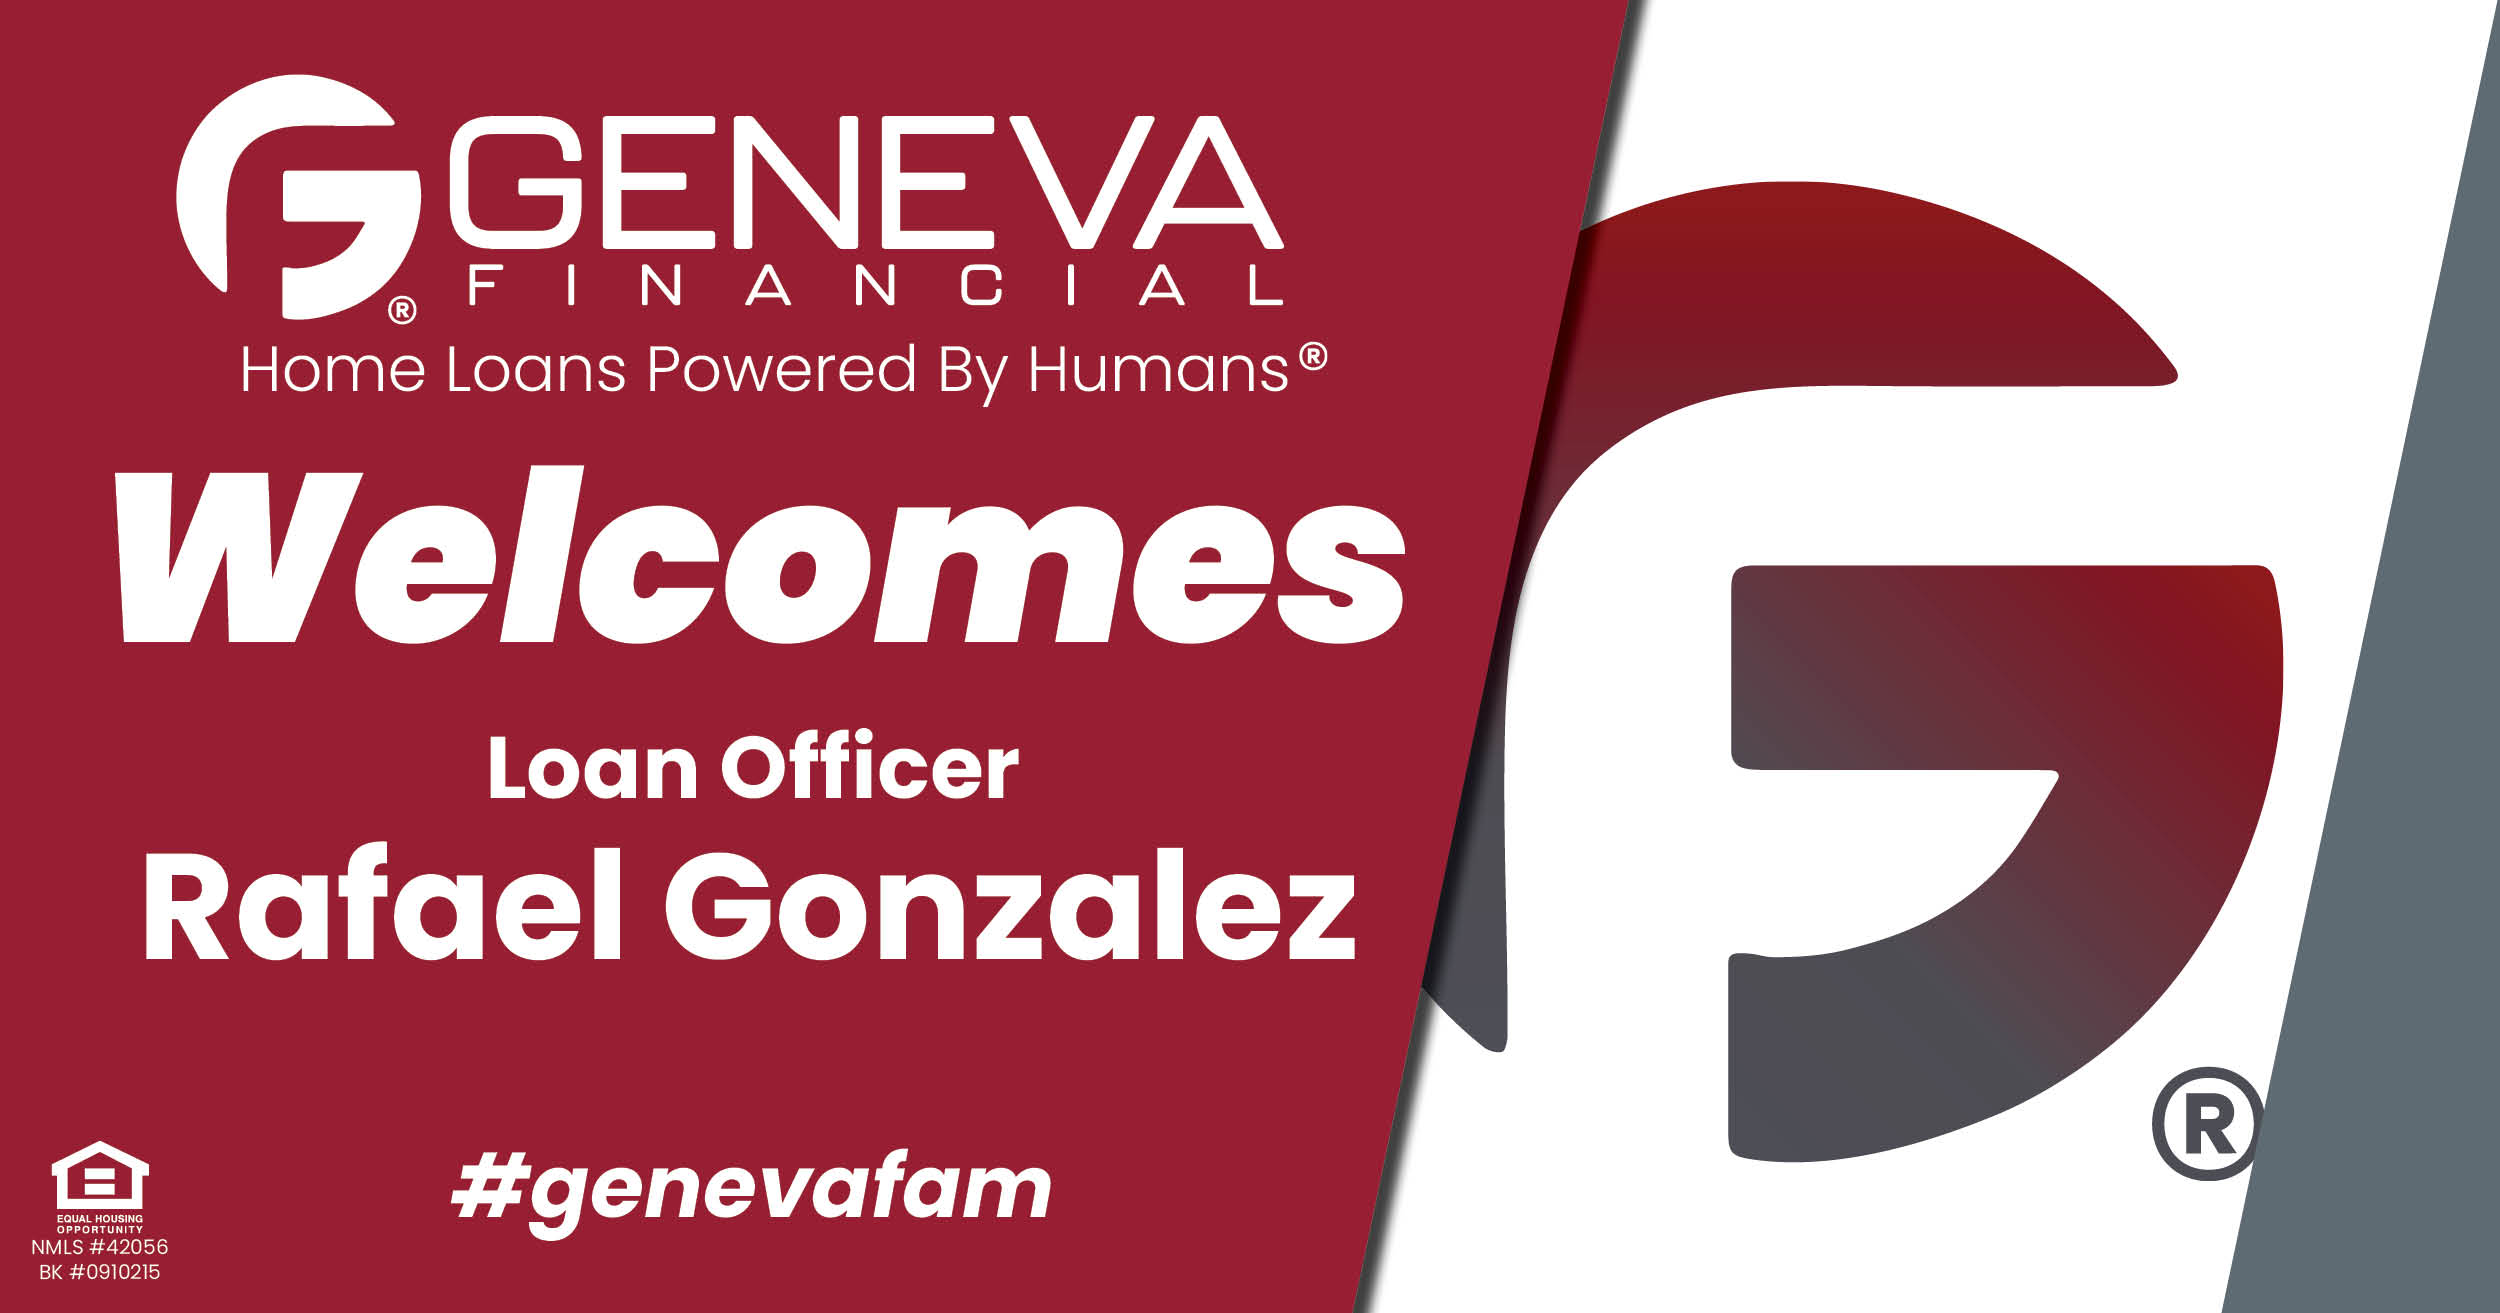 Geneva Financial Welcomes New Loan Officer Rafael Gonzalez to Miami, FL – Home Loans Powered by Humans®.